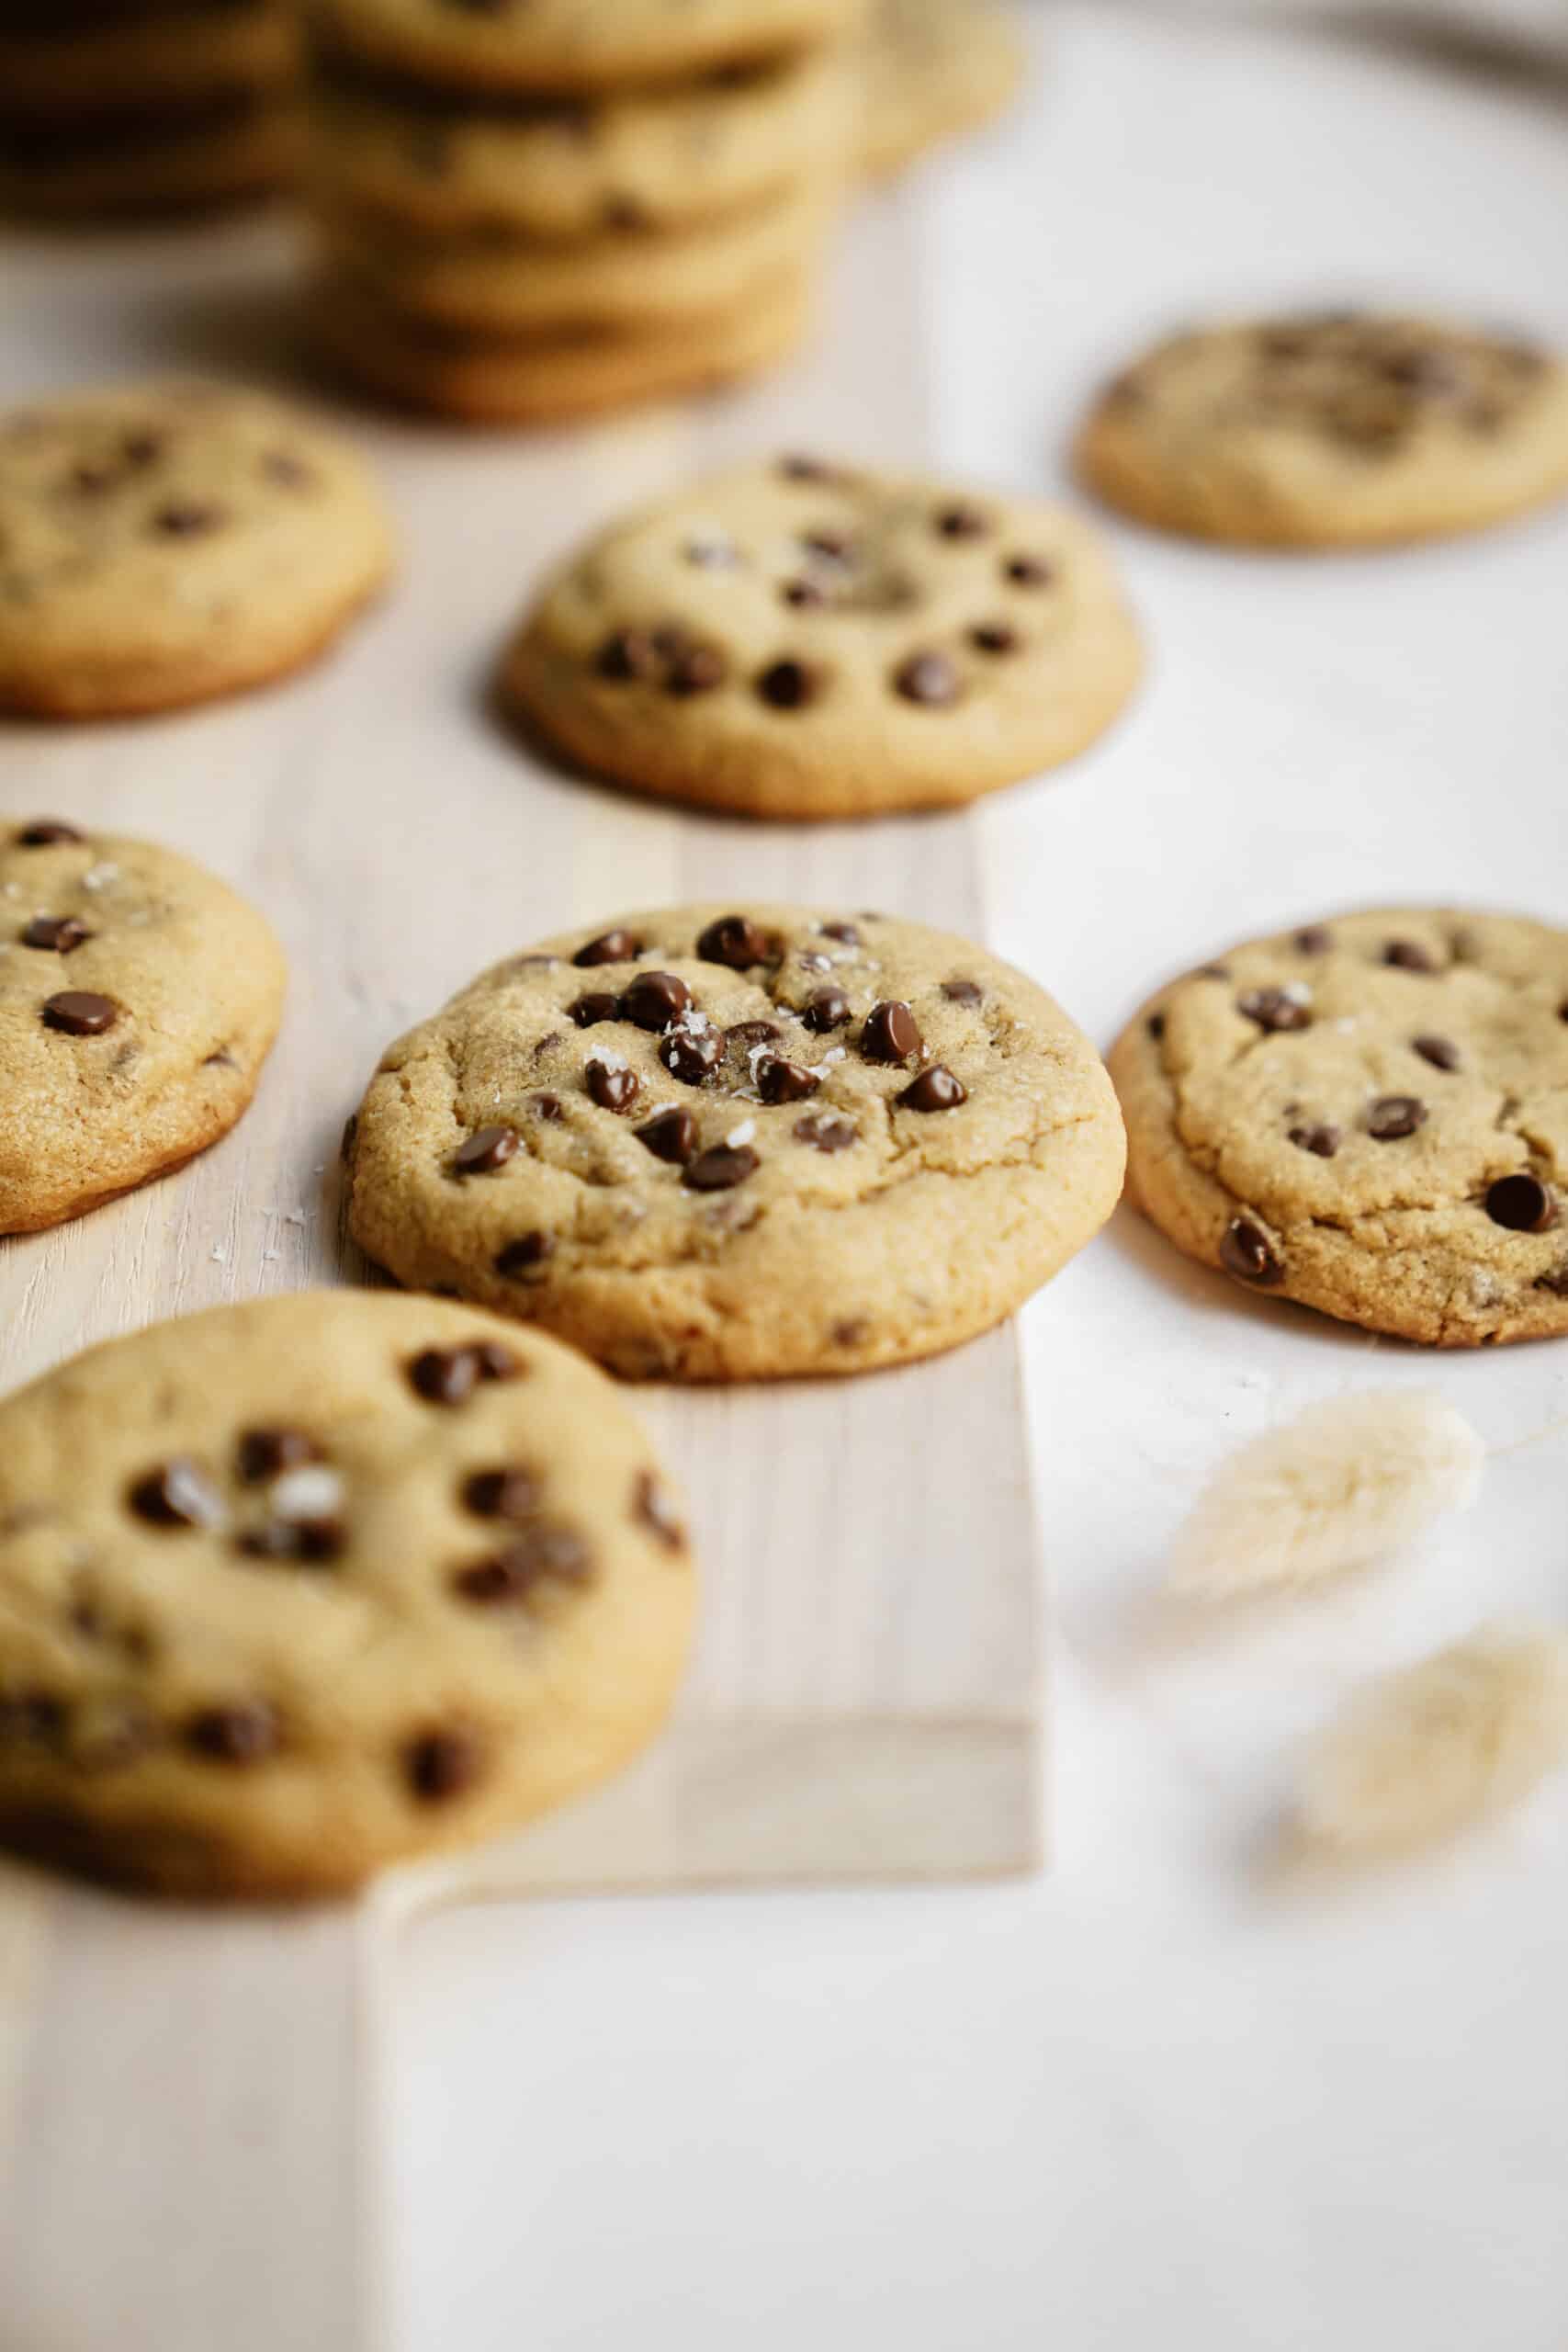 Homemade chocolate chip cookies on a counter